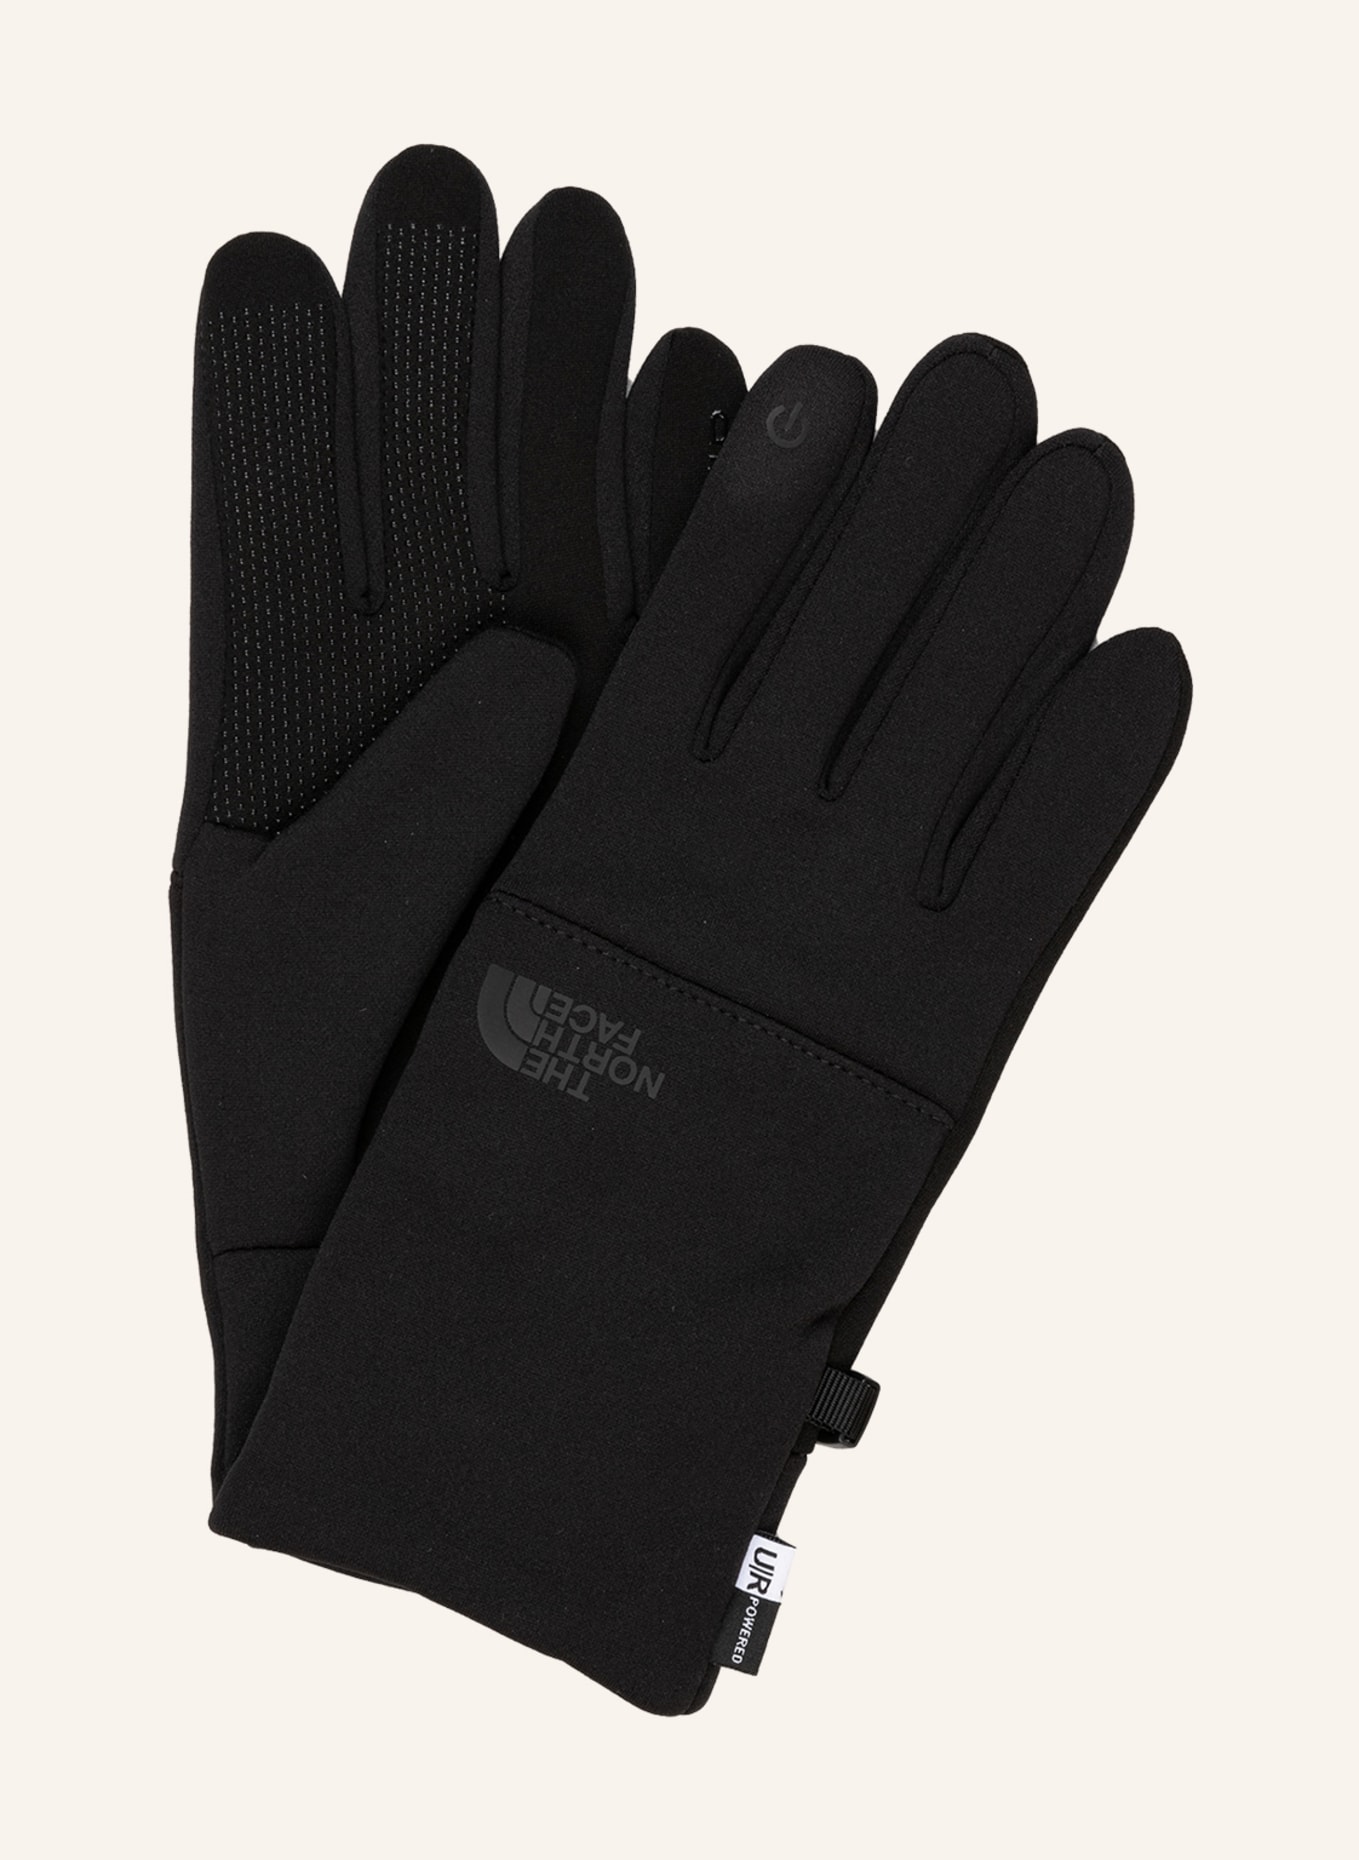 THE NORTH FACE Multisport gloves ETIP with touchscreen function in black